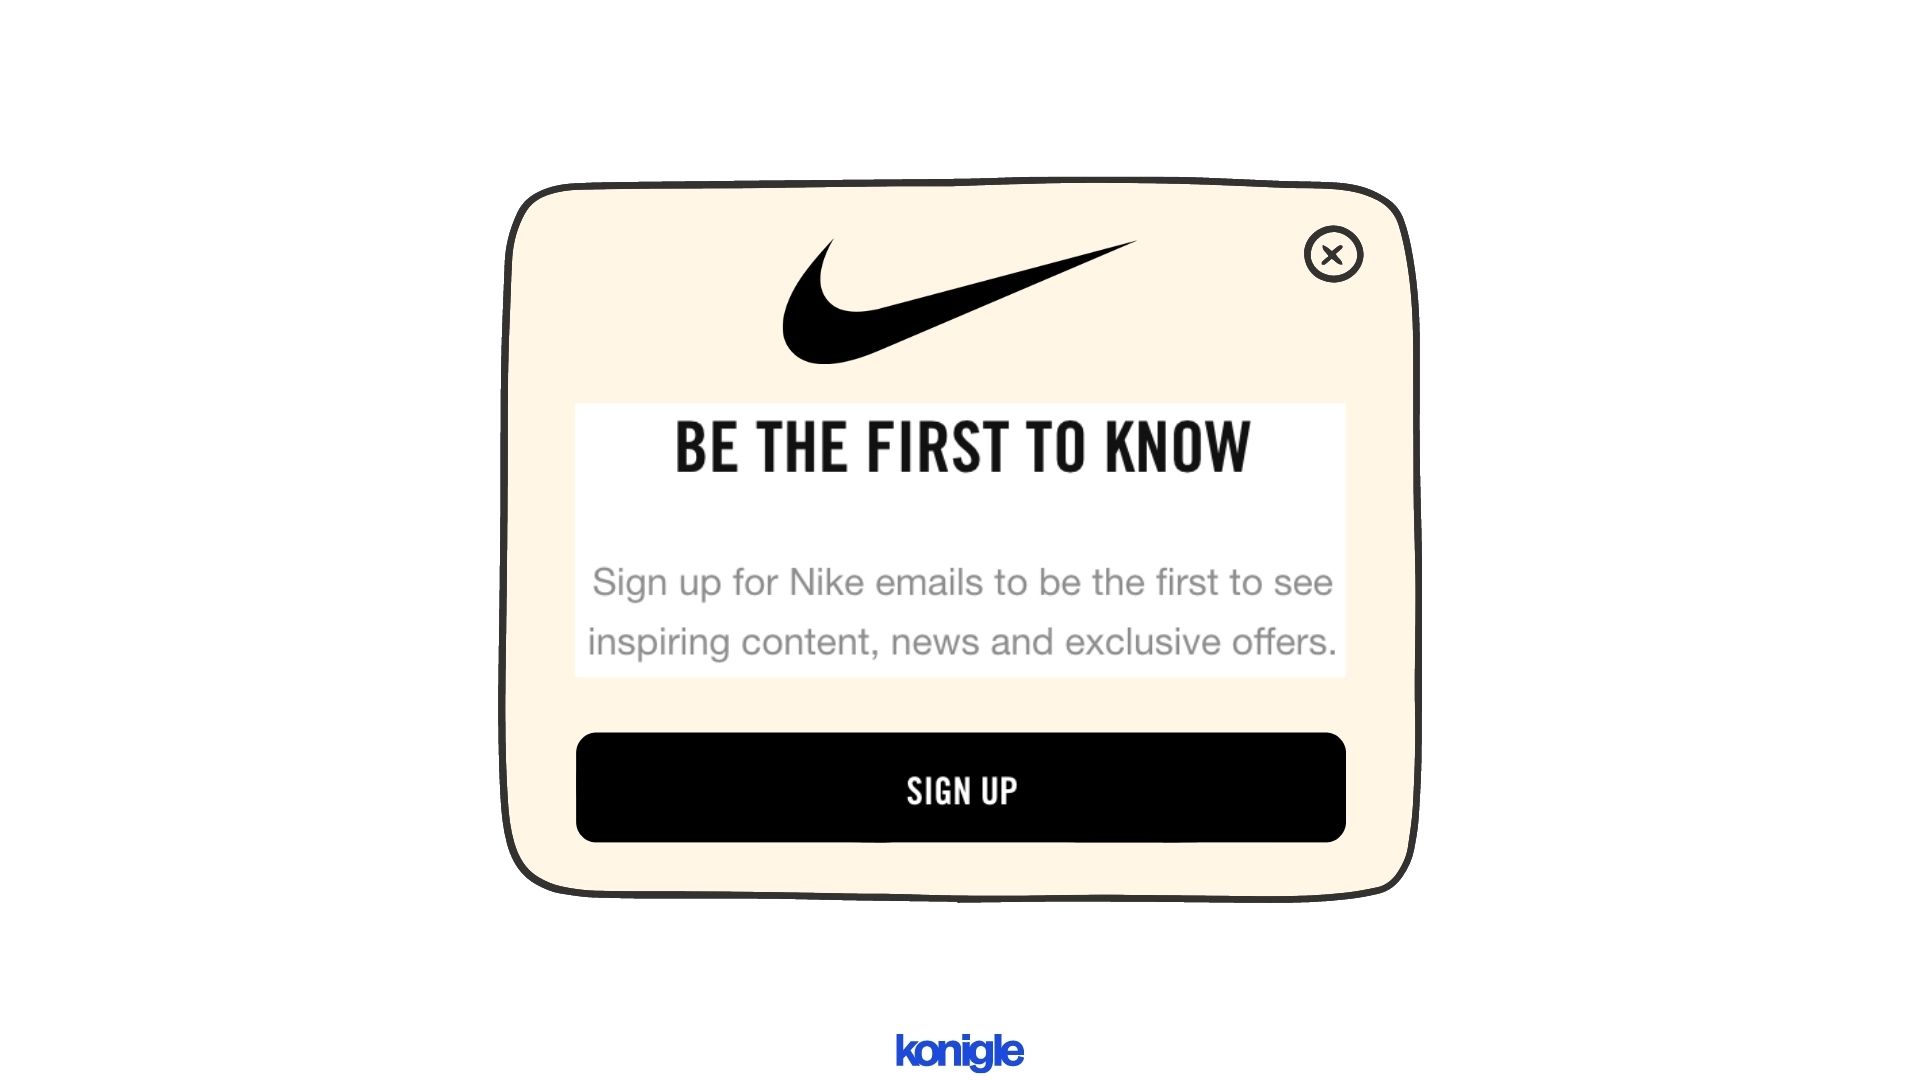 Nike uses Exit-intent popups to reduce bounce rate.